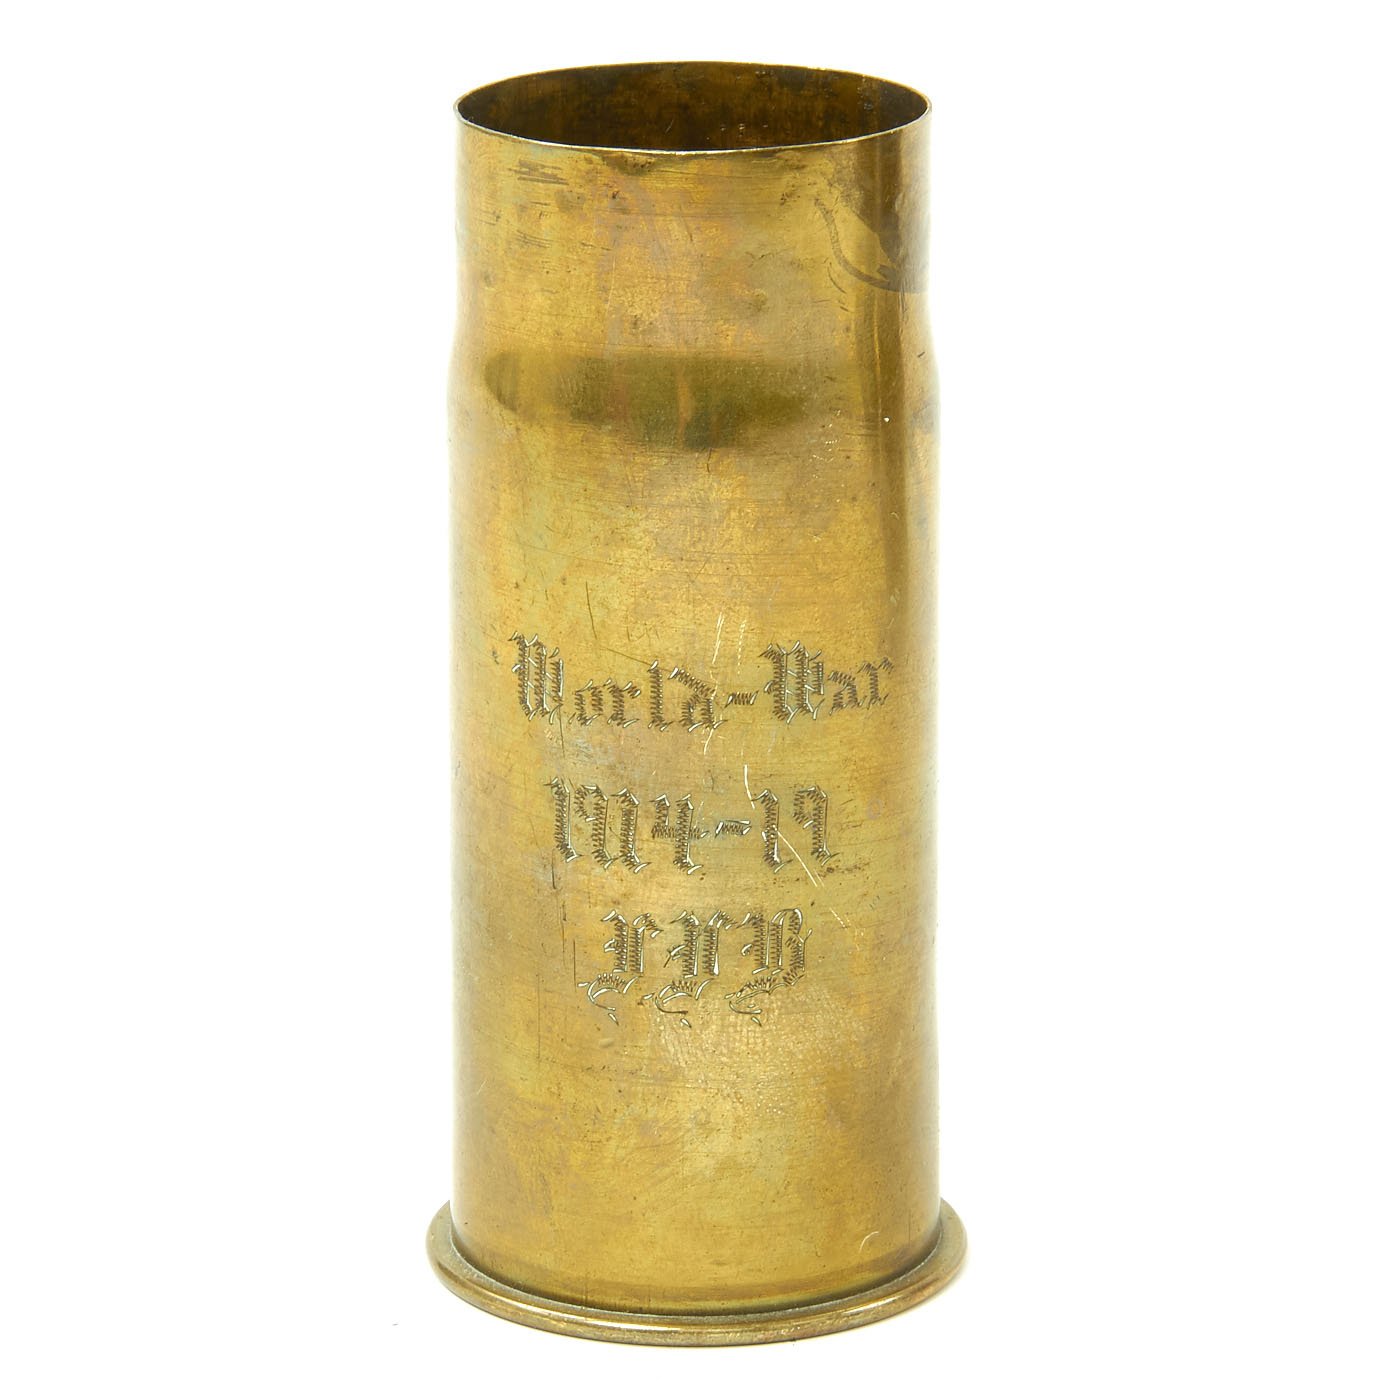 Original WWI Trench Art Engraved French Artillery Shells - German